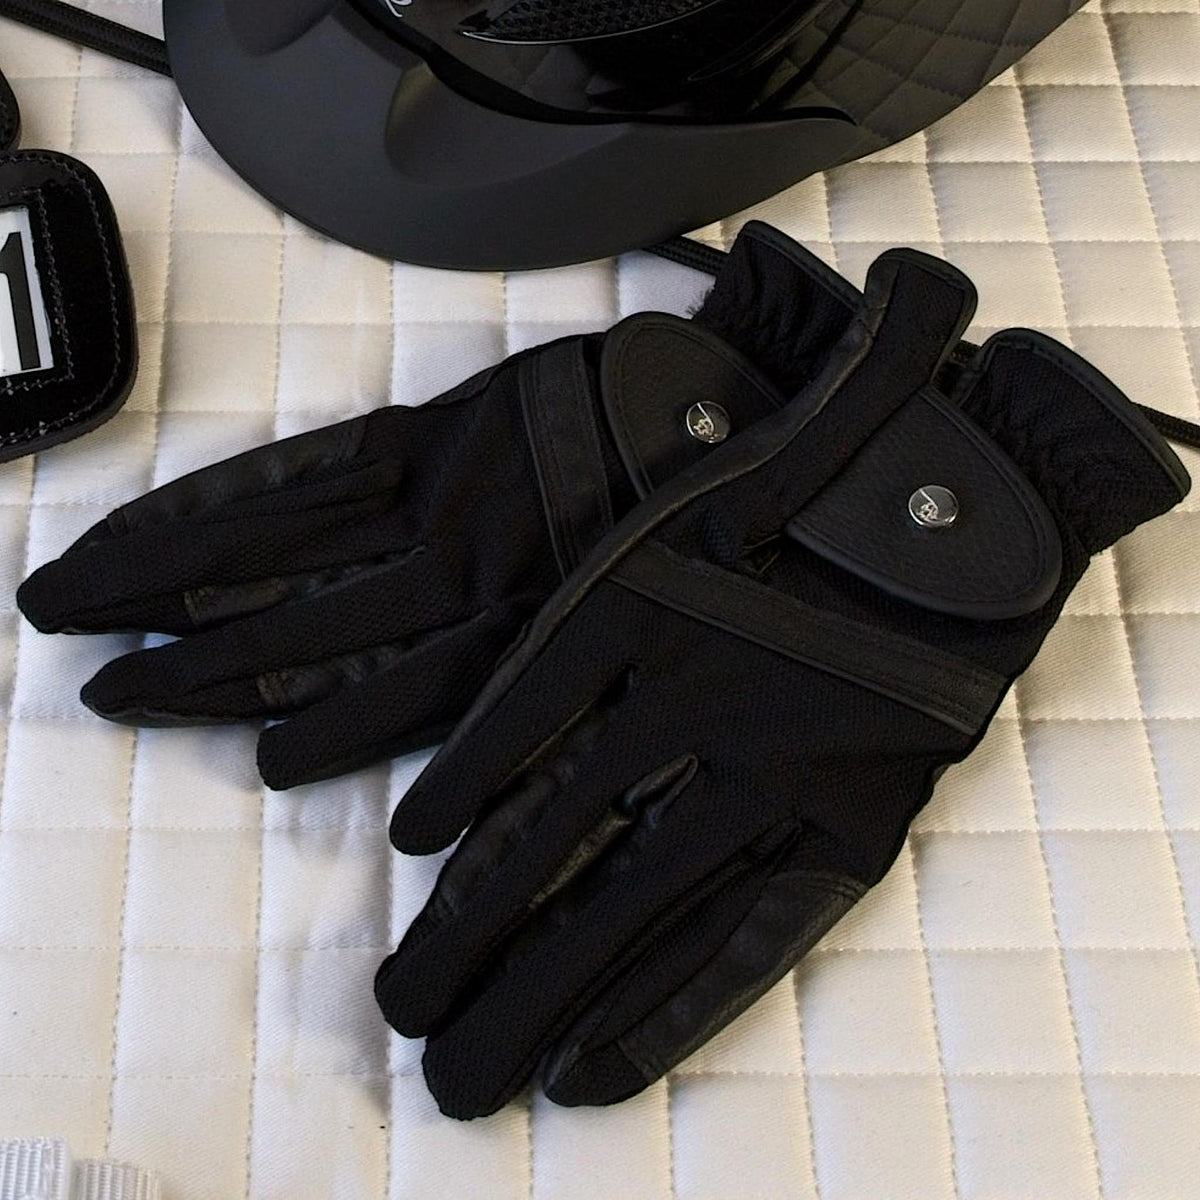 Pair of black riding gloves with leather details and subtly shiny buttons.